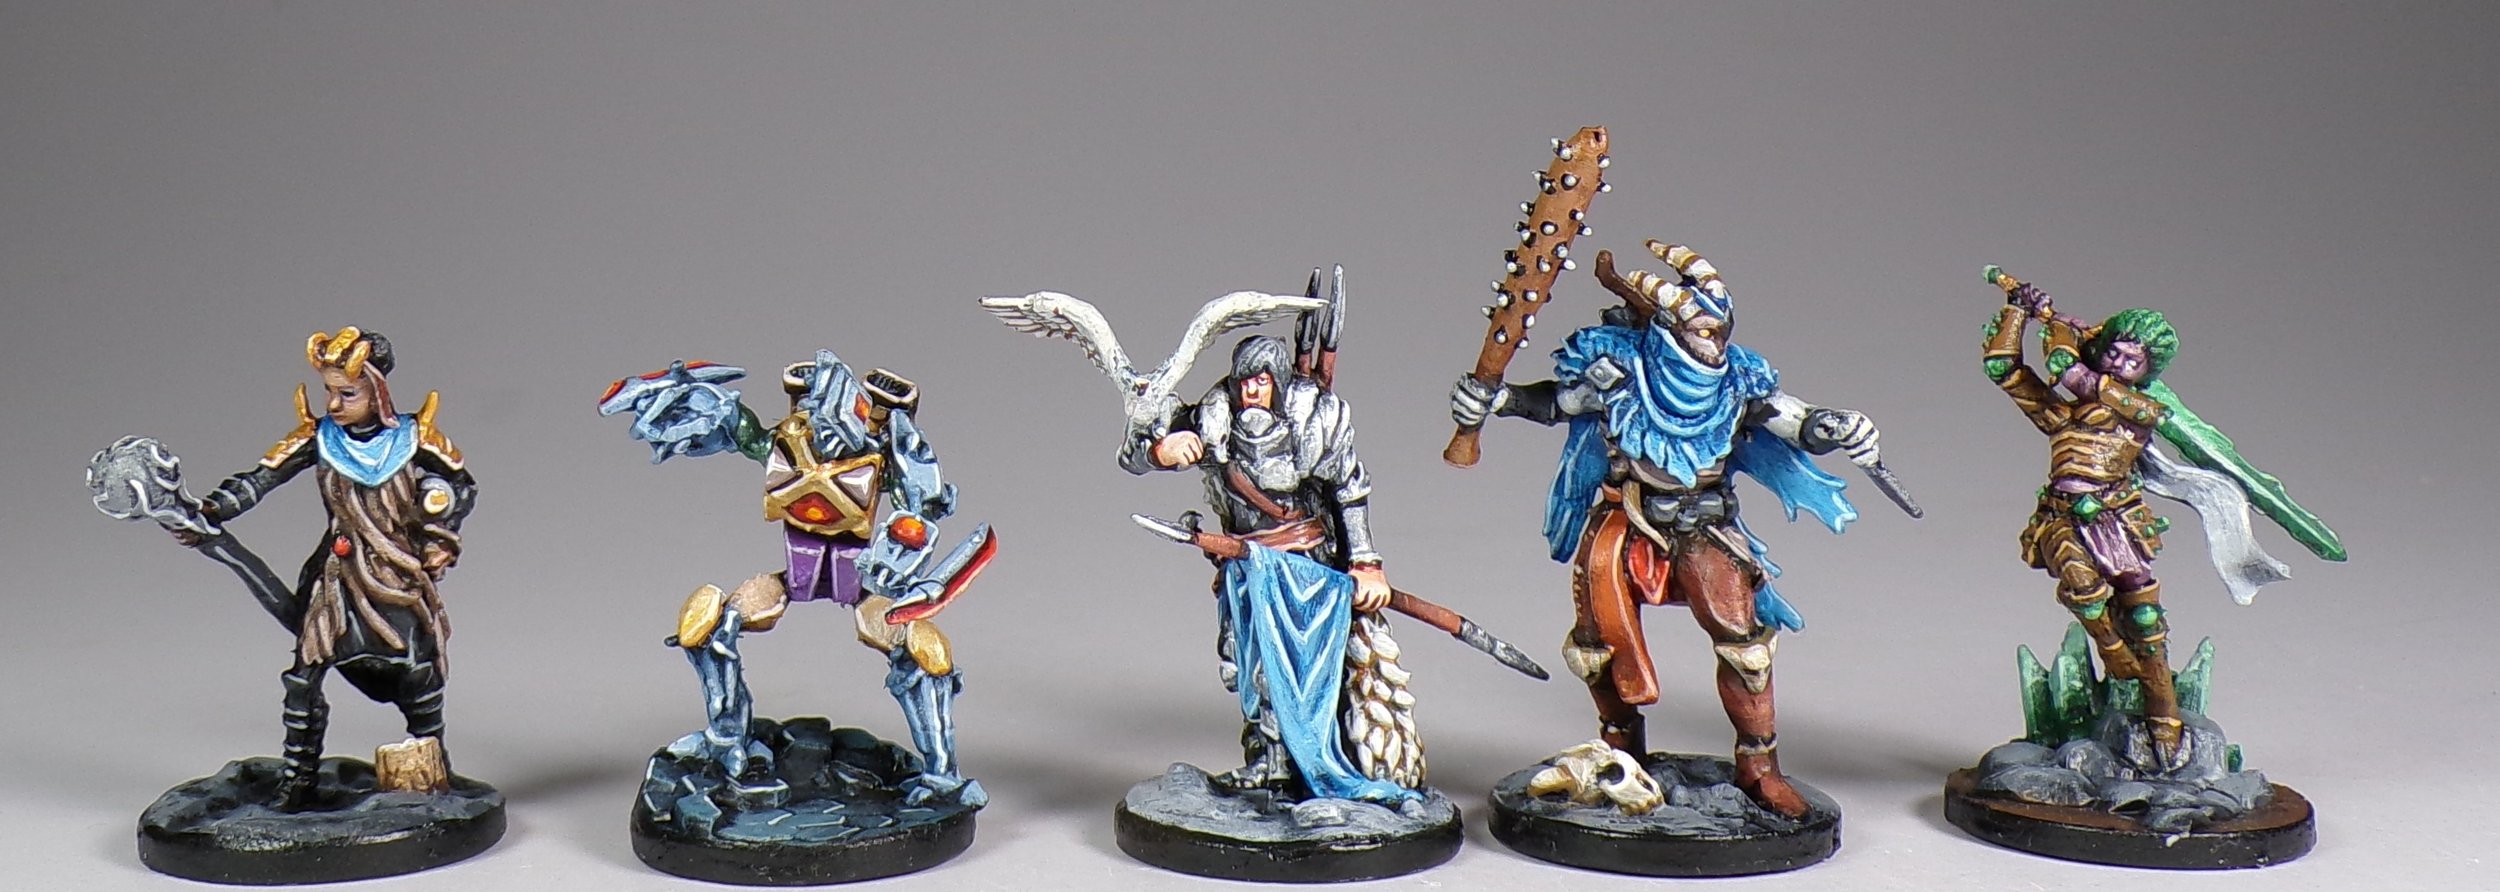 Frosthaven Miniature Painting Paintedfigs (2).jpg